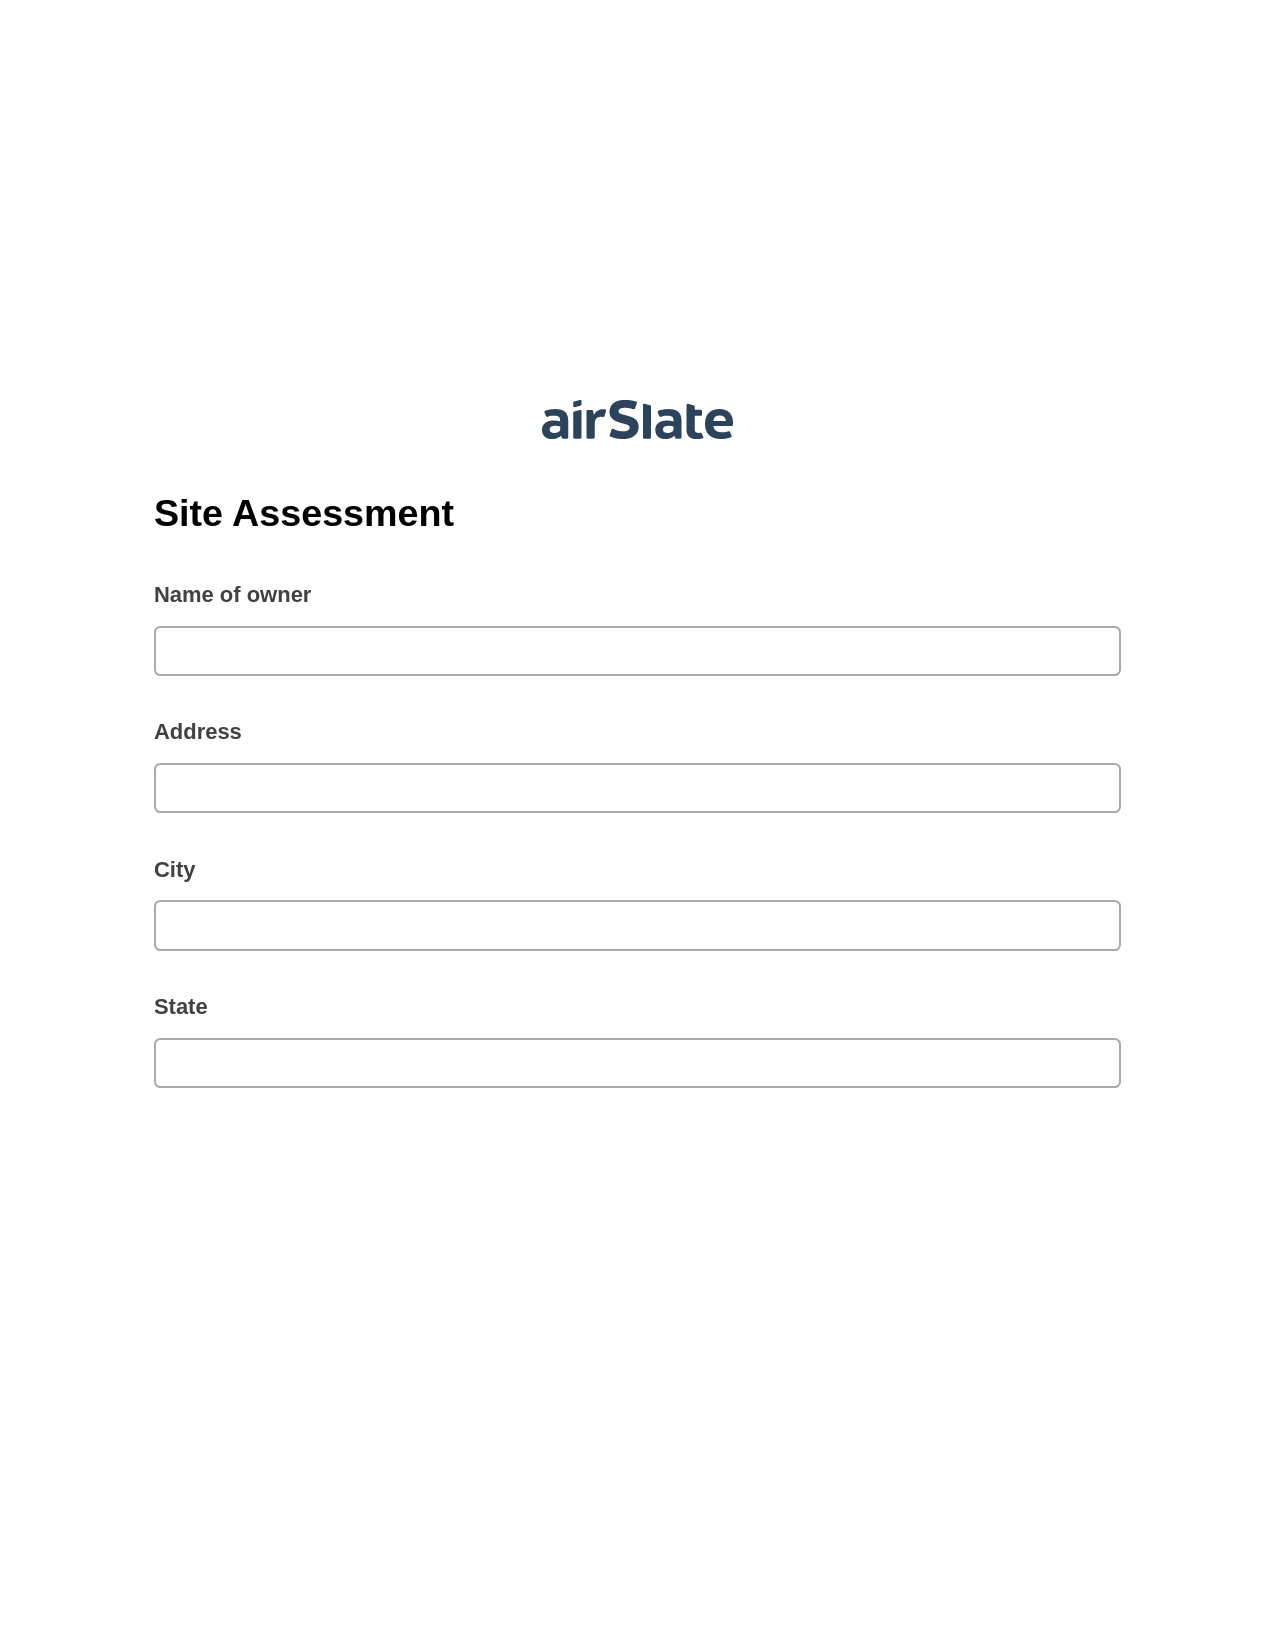 Site Assessment Pre-fill from Excel Spreadsheet Bot, System Bot - Create a Slate in another Flow, Export to Smartsheet